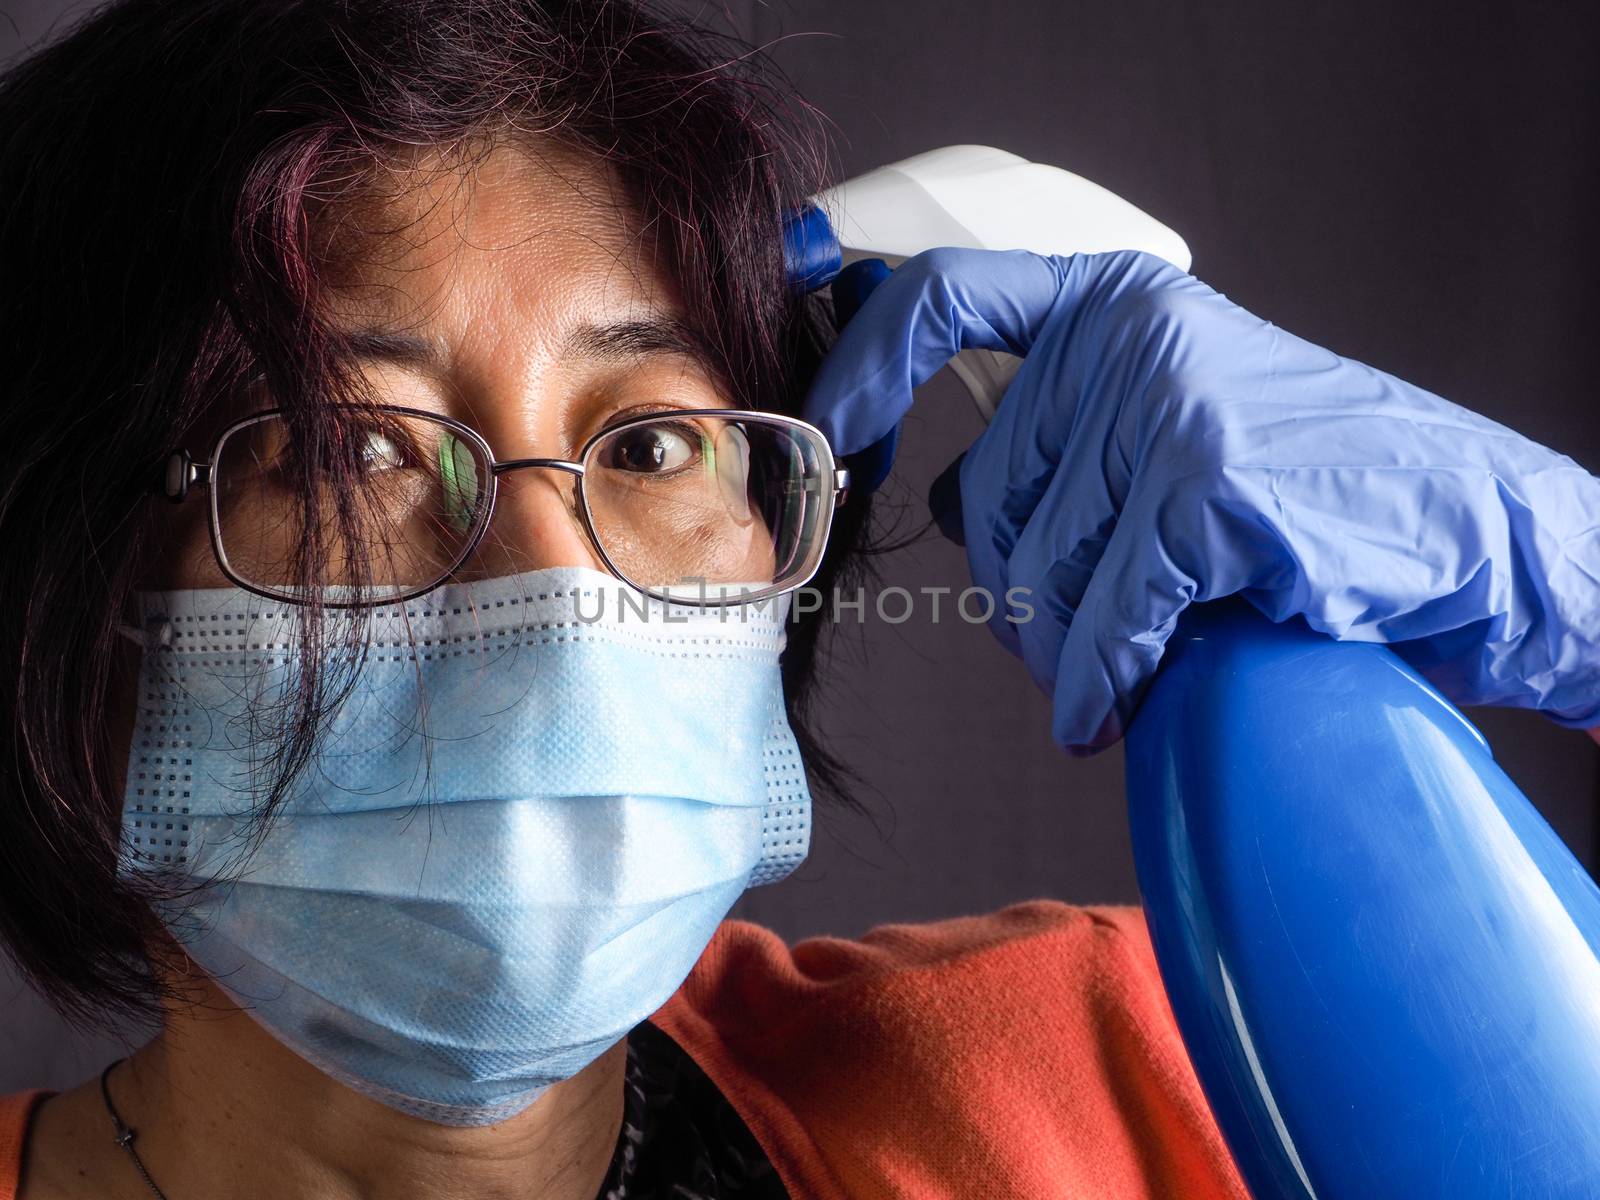 funny humorous adult asian 40s 50s woman wearing protection surgical face mask , blue latex gloves, and sun glasses pointing the head with blue sanitizer cleaning  bottle as a weapon as tired of confinement covid concept.